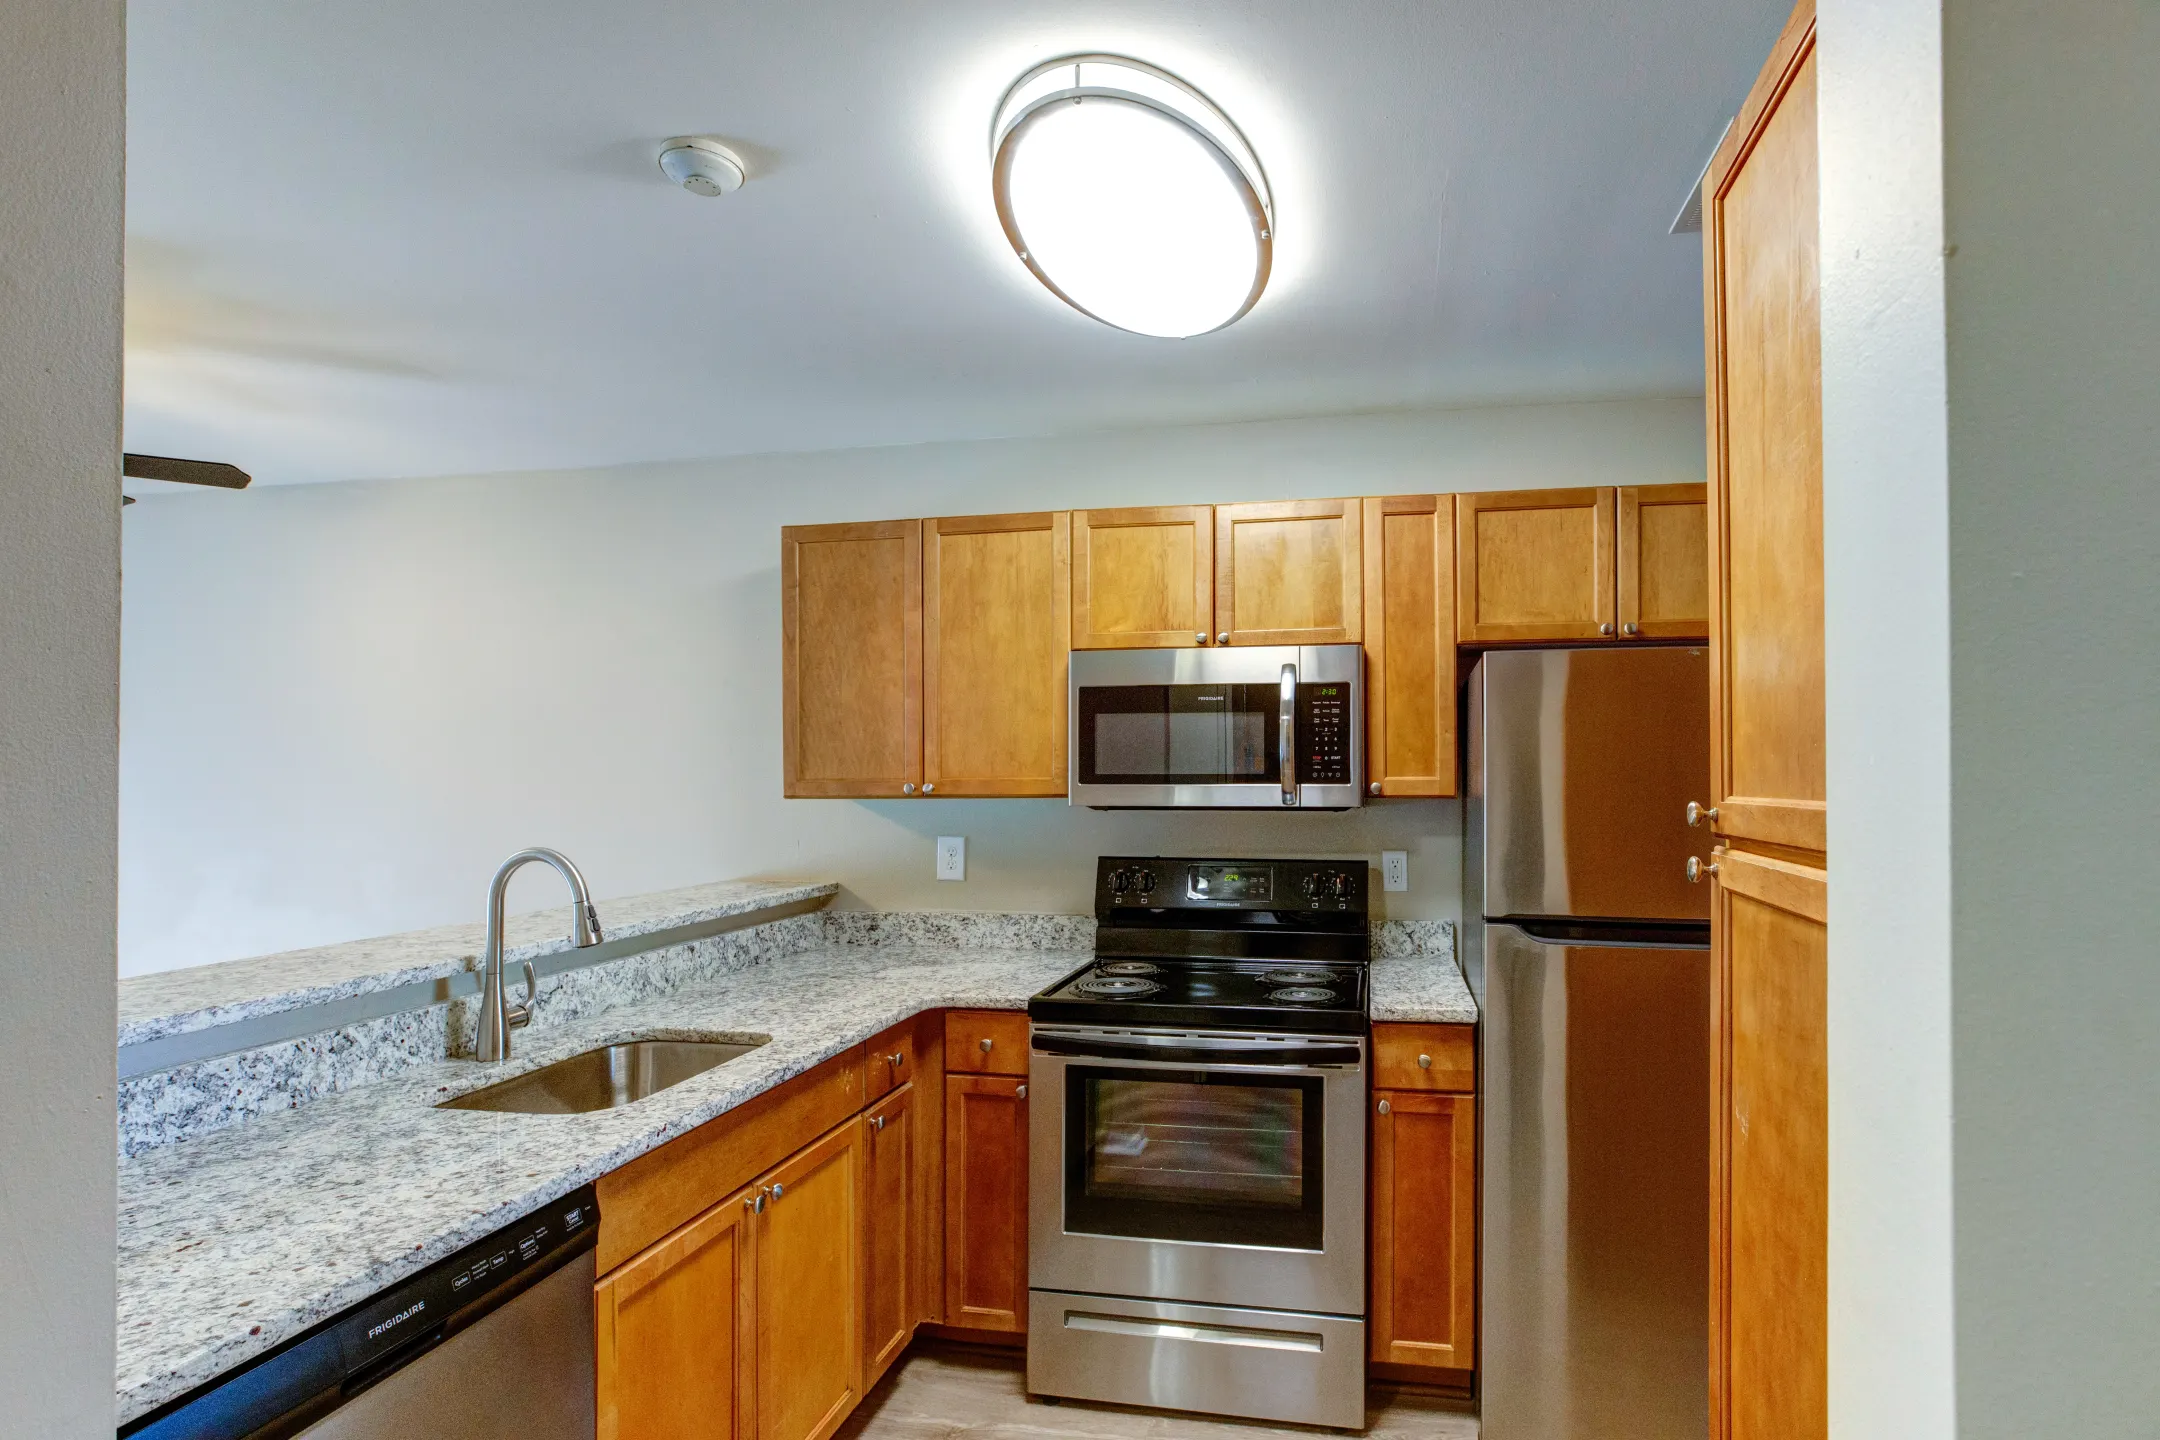 Kitchen - The Pointe at Canton Apartments & Townhomes - Canton, MI